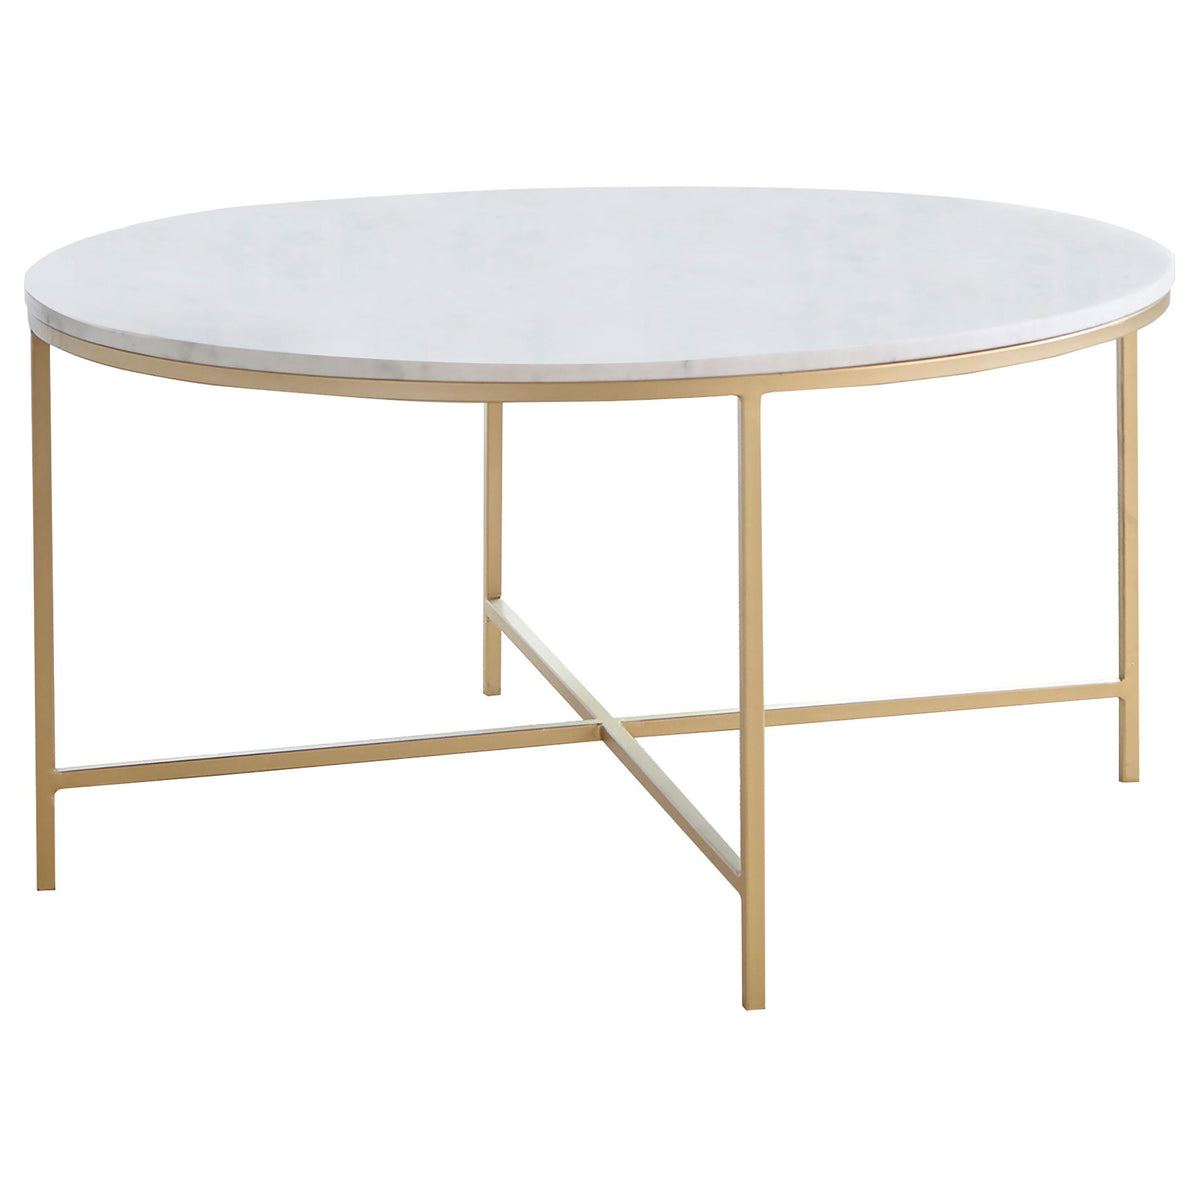 Ellison Round X-cross Coffee Table White and Gold Ellison Round X-cross Coffee Table White and Gold Half Price Furniture